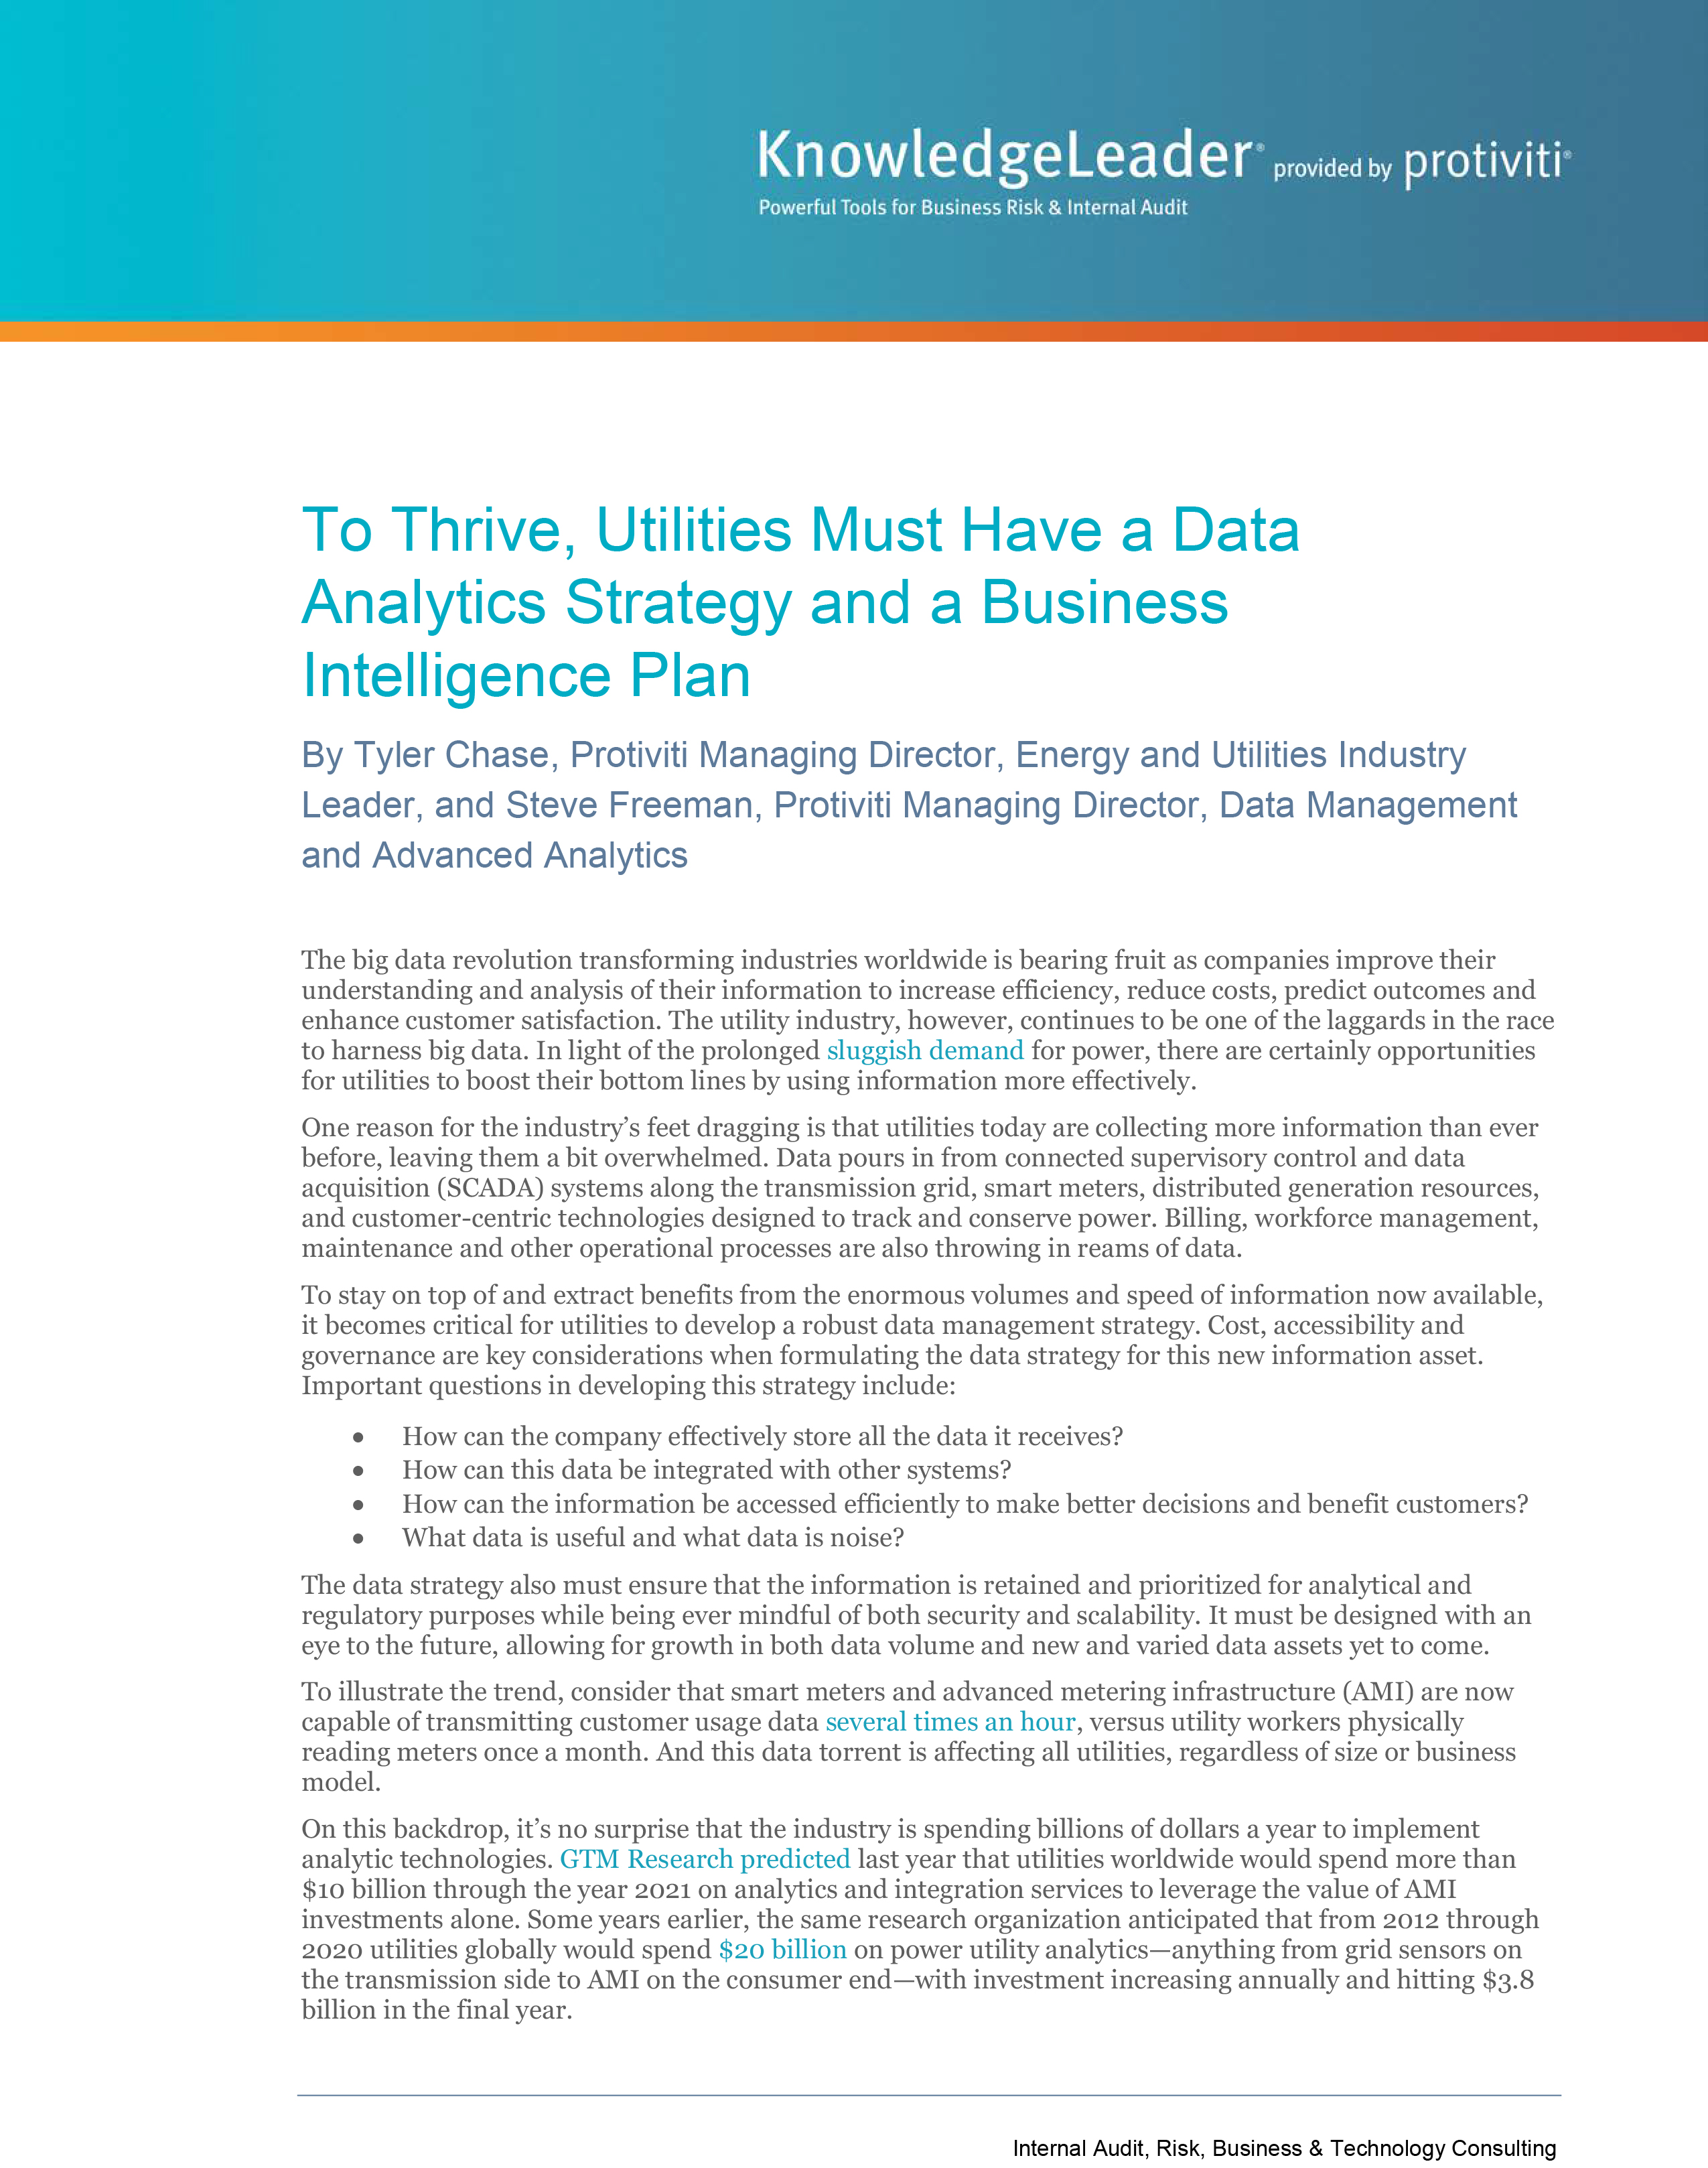 Screenshot of the first page of To Thrive, Utilities Must Have a Data Analytics Strategy and a Business Intelligence Plan